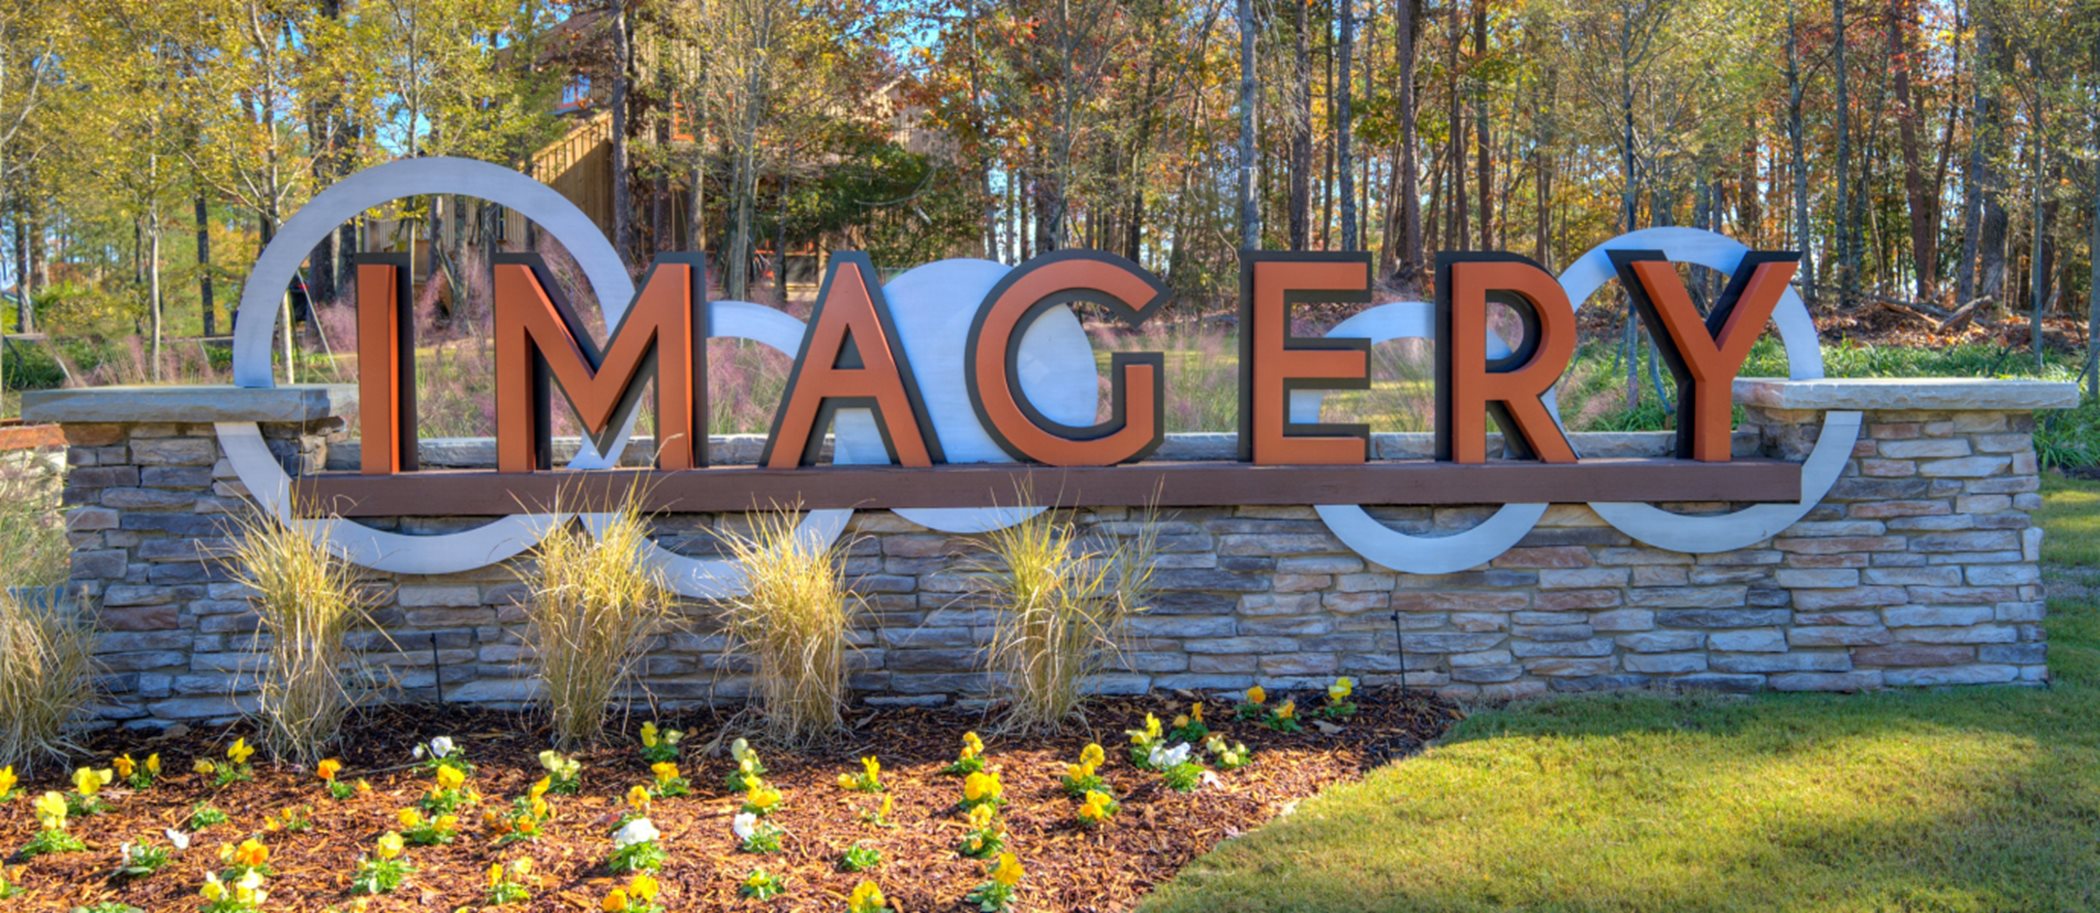 Imagery Entrance Sign